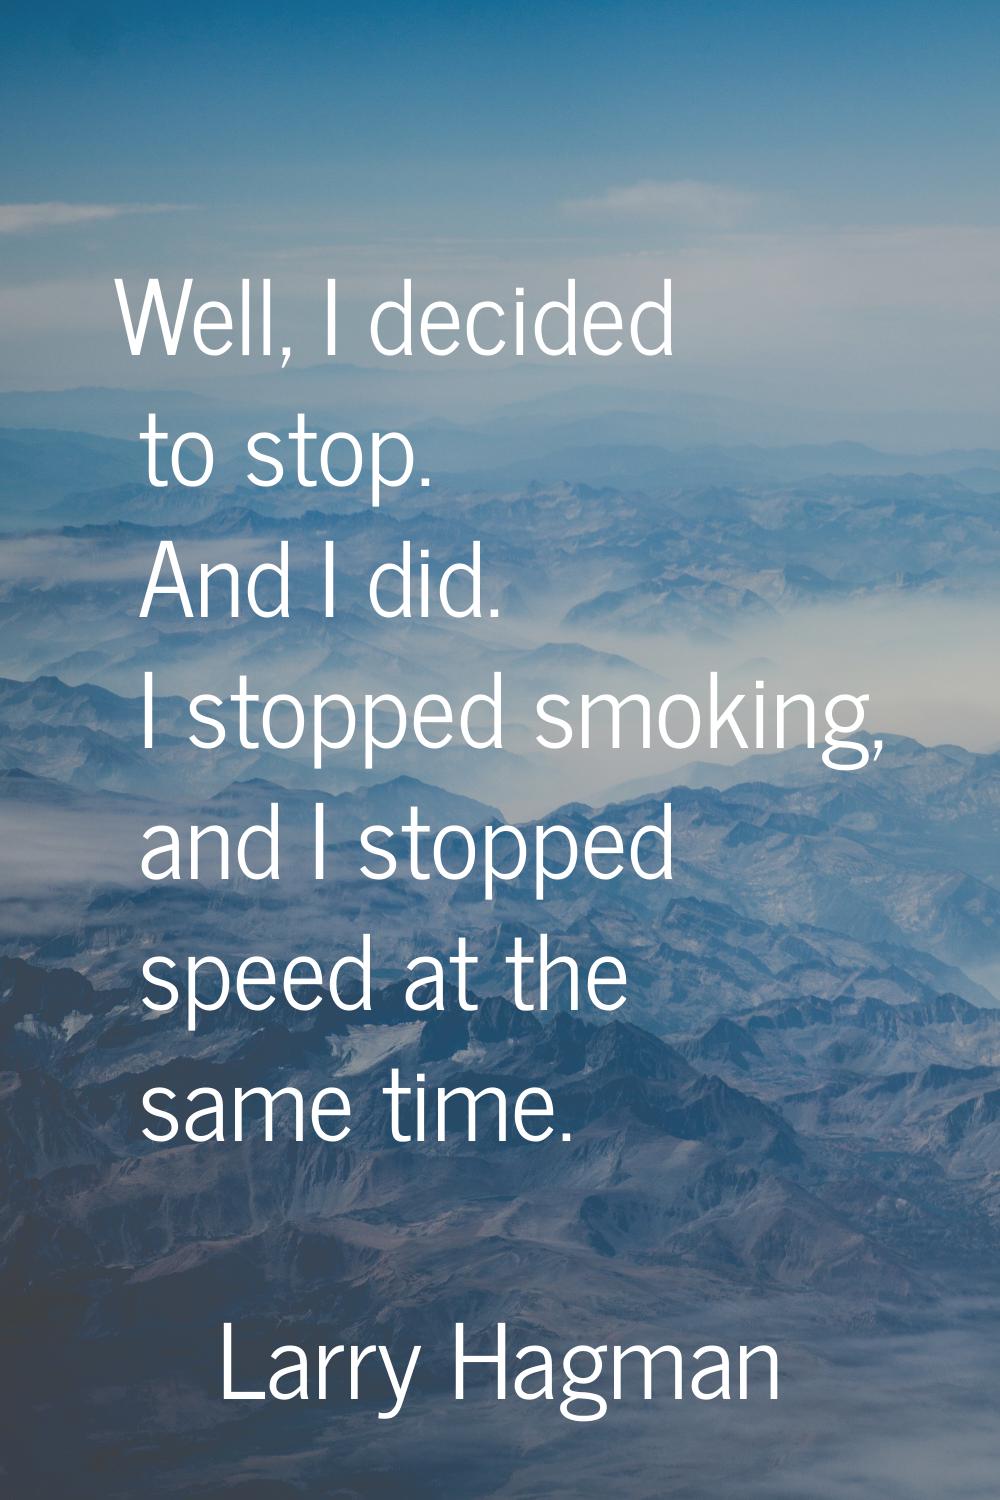 Well, I decided to stop. And I did. I stopped smoking, and I stopped speed at the same time.